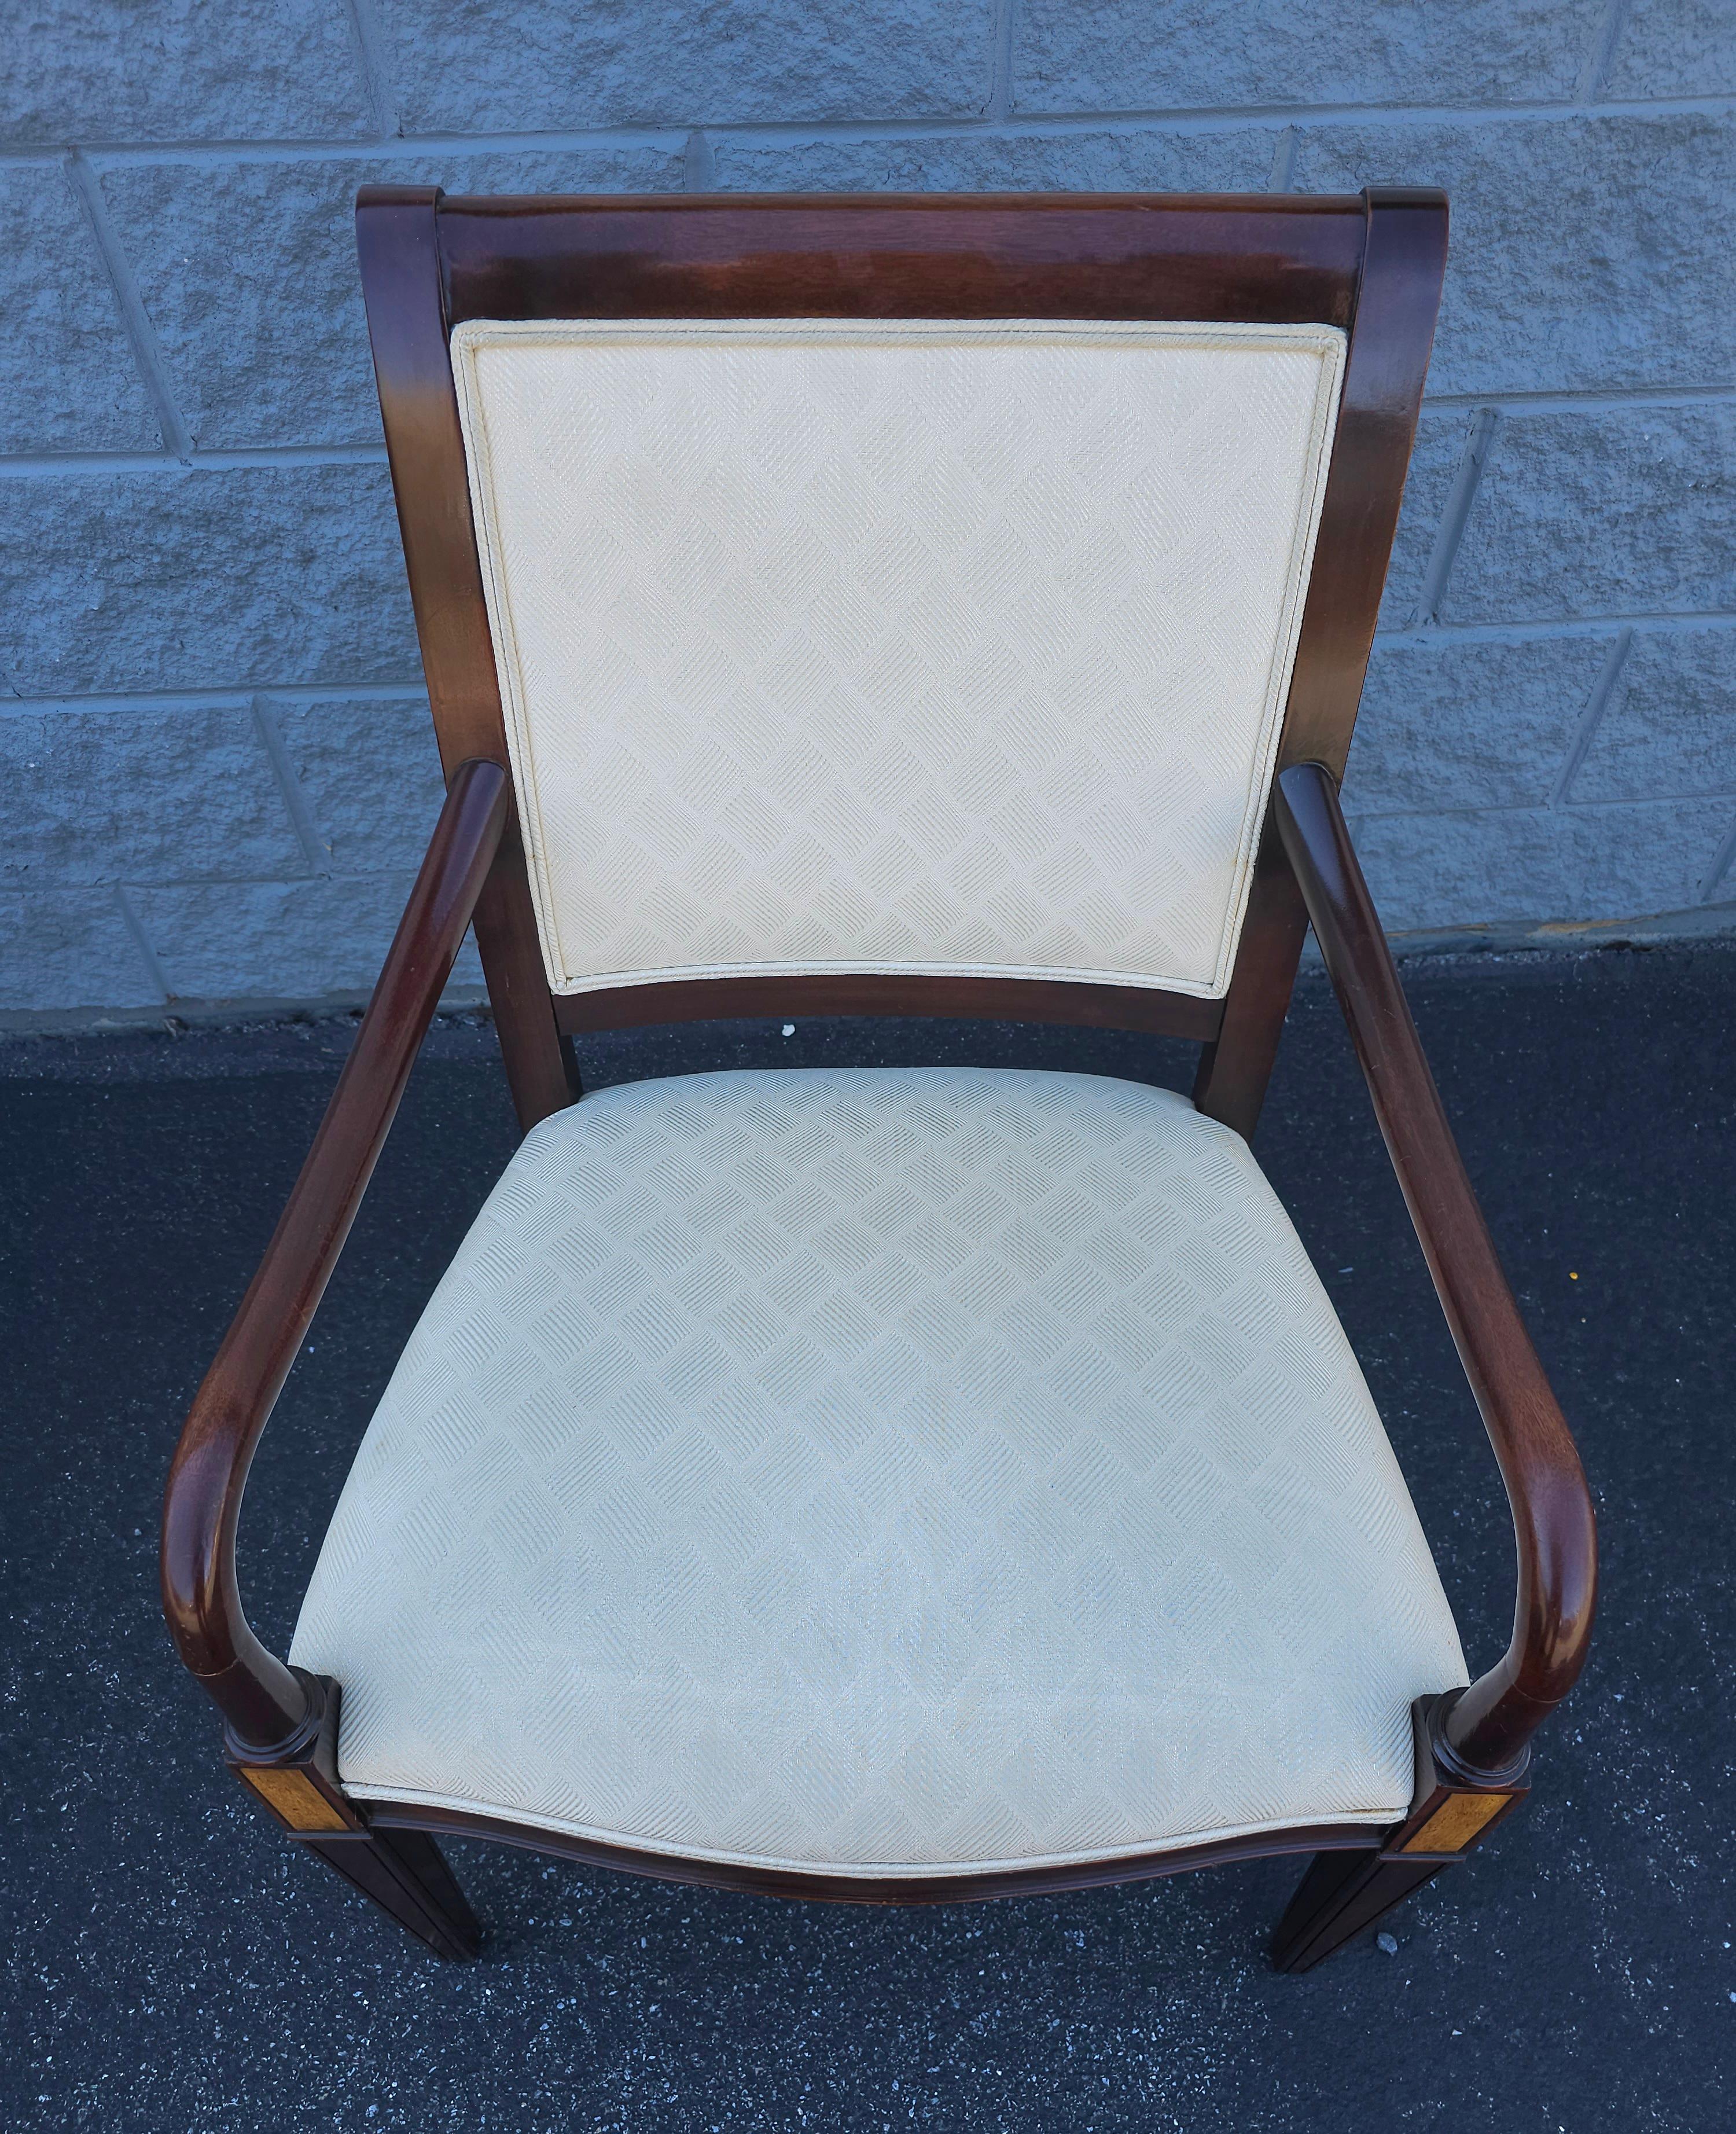 20th C. Hickory Chair Federal Style Mahogany Inlaid and Upholstered Arm Chair For Sale 1